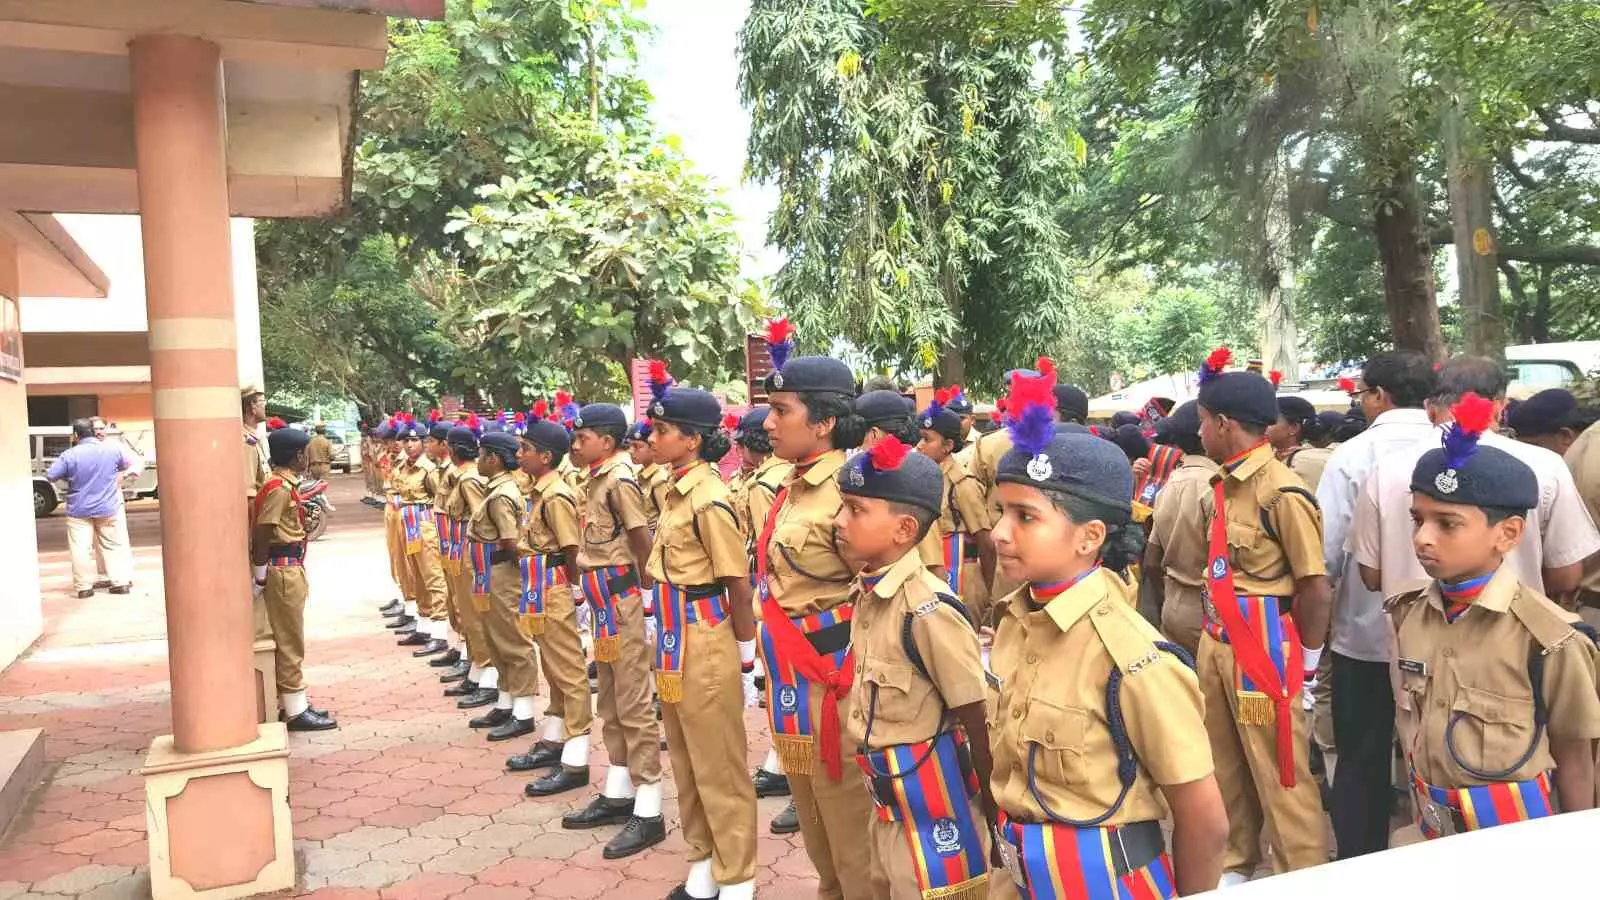 UP government initiative Student Police Cadet Programme police constables will be ready in schools